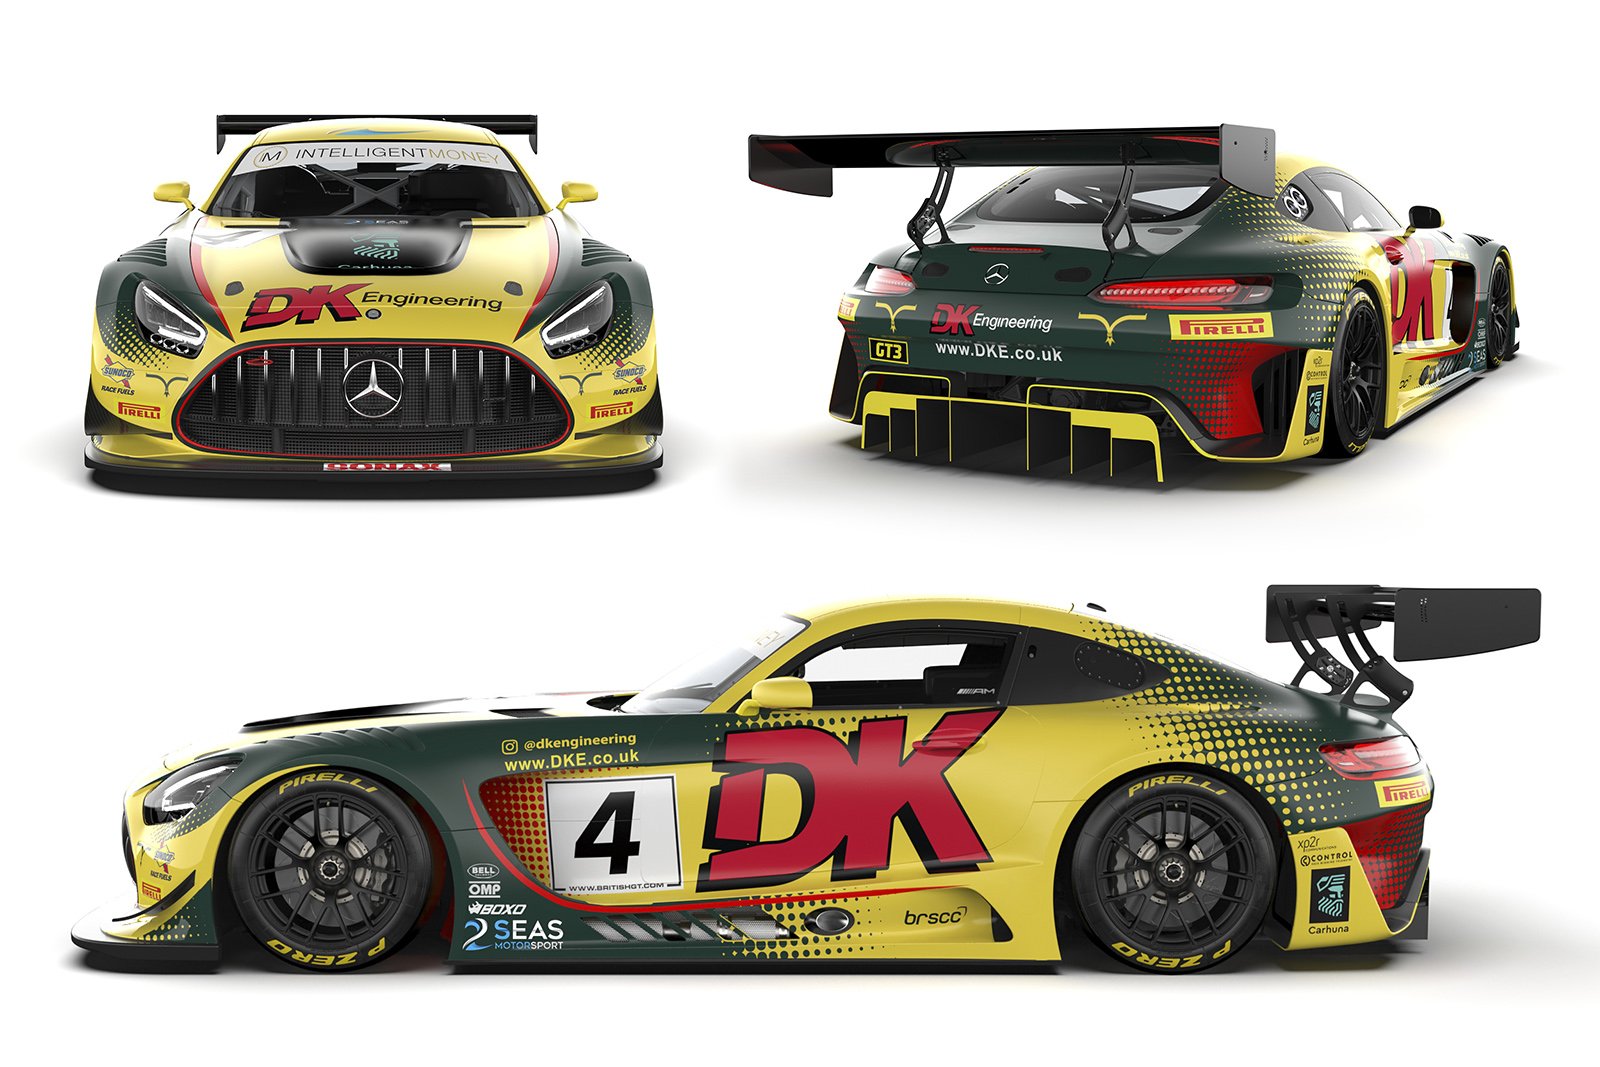 2 Seas Motorsport's DK Engineering backed Mercedes returns for 2023 with James Cottingham and Jonny Adam at the wheel.